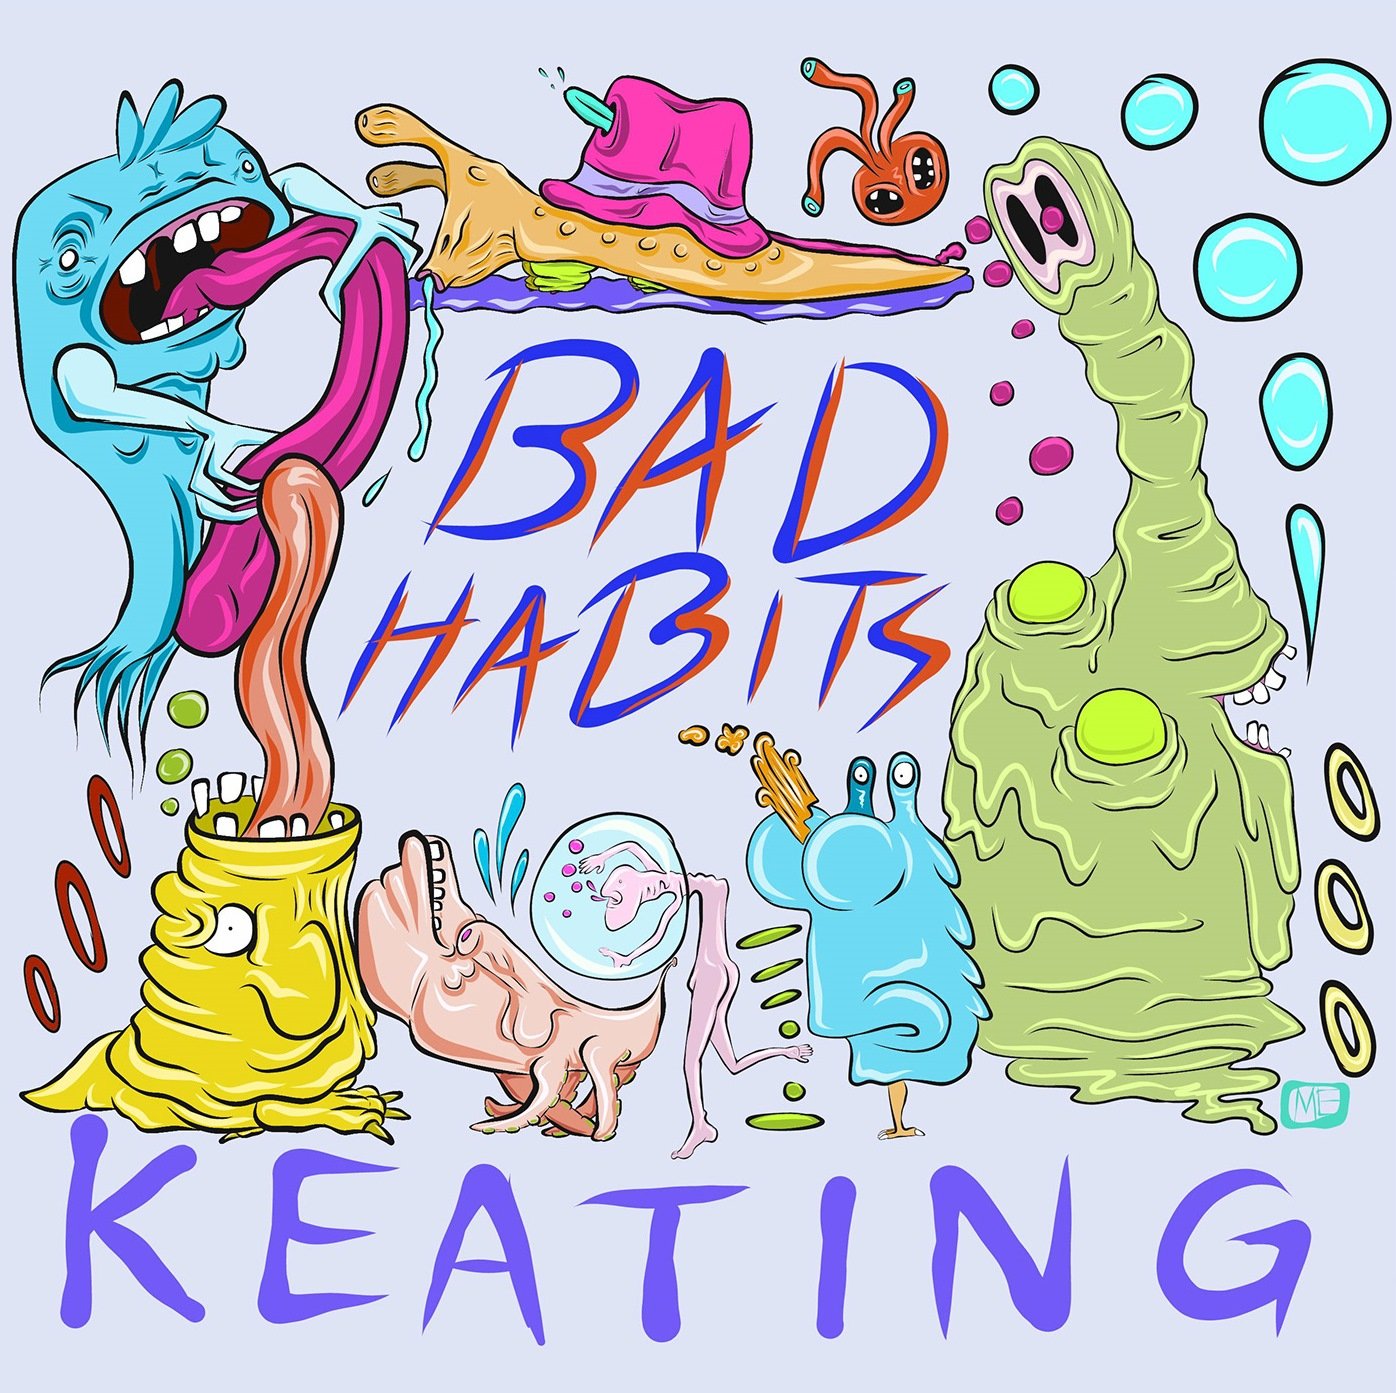 Bad Habits Album Cover for Keating - 2018